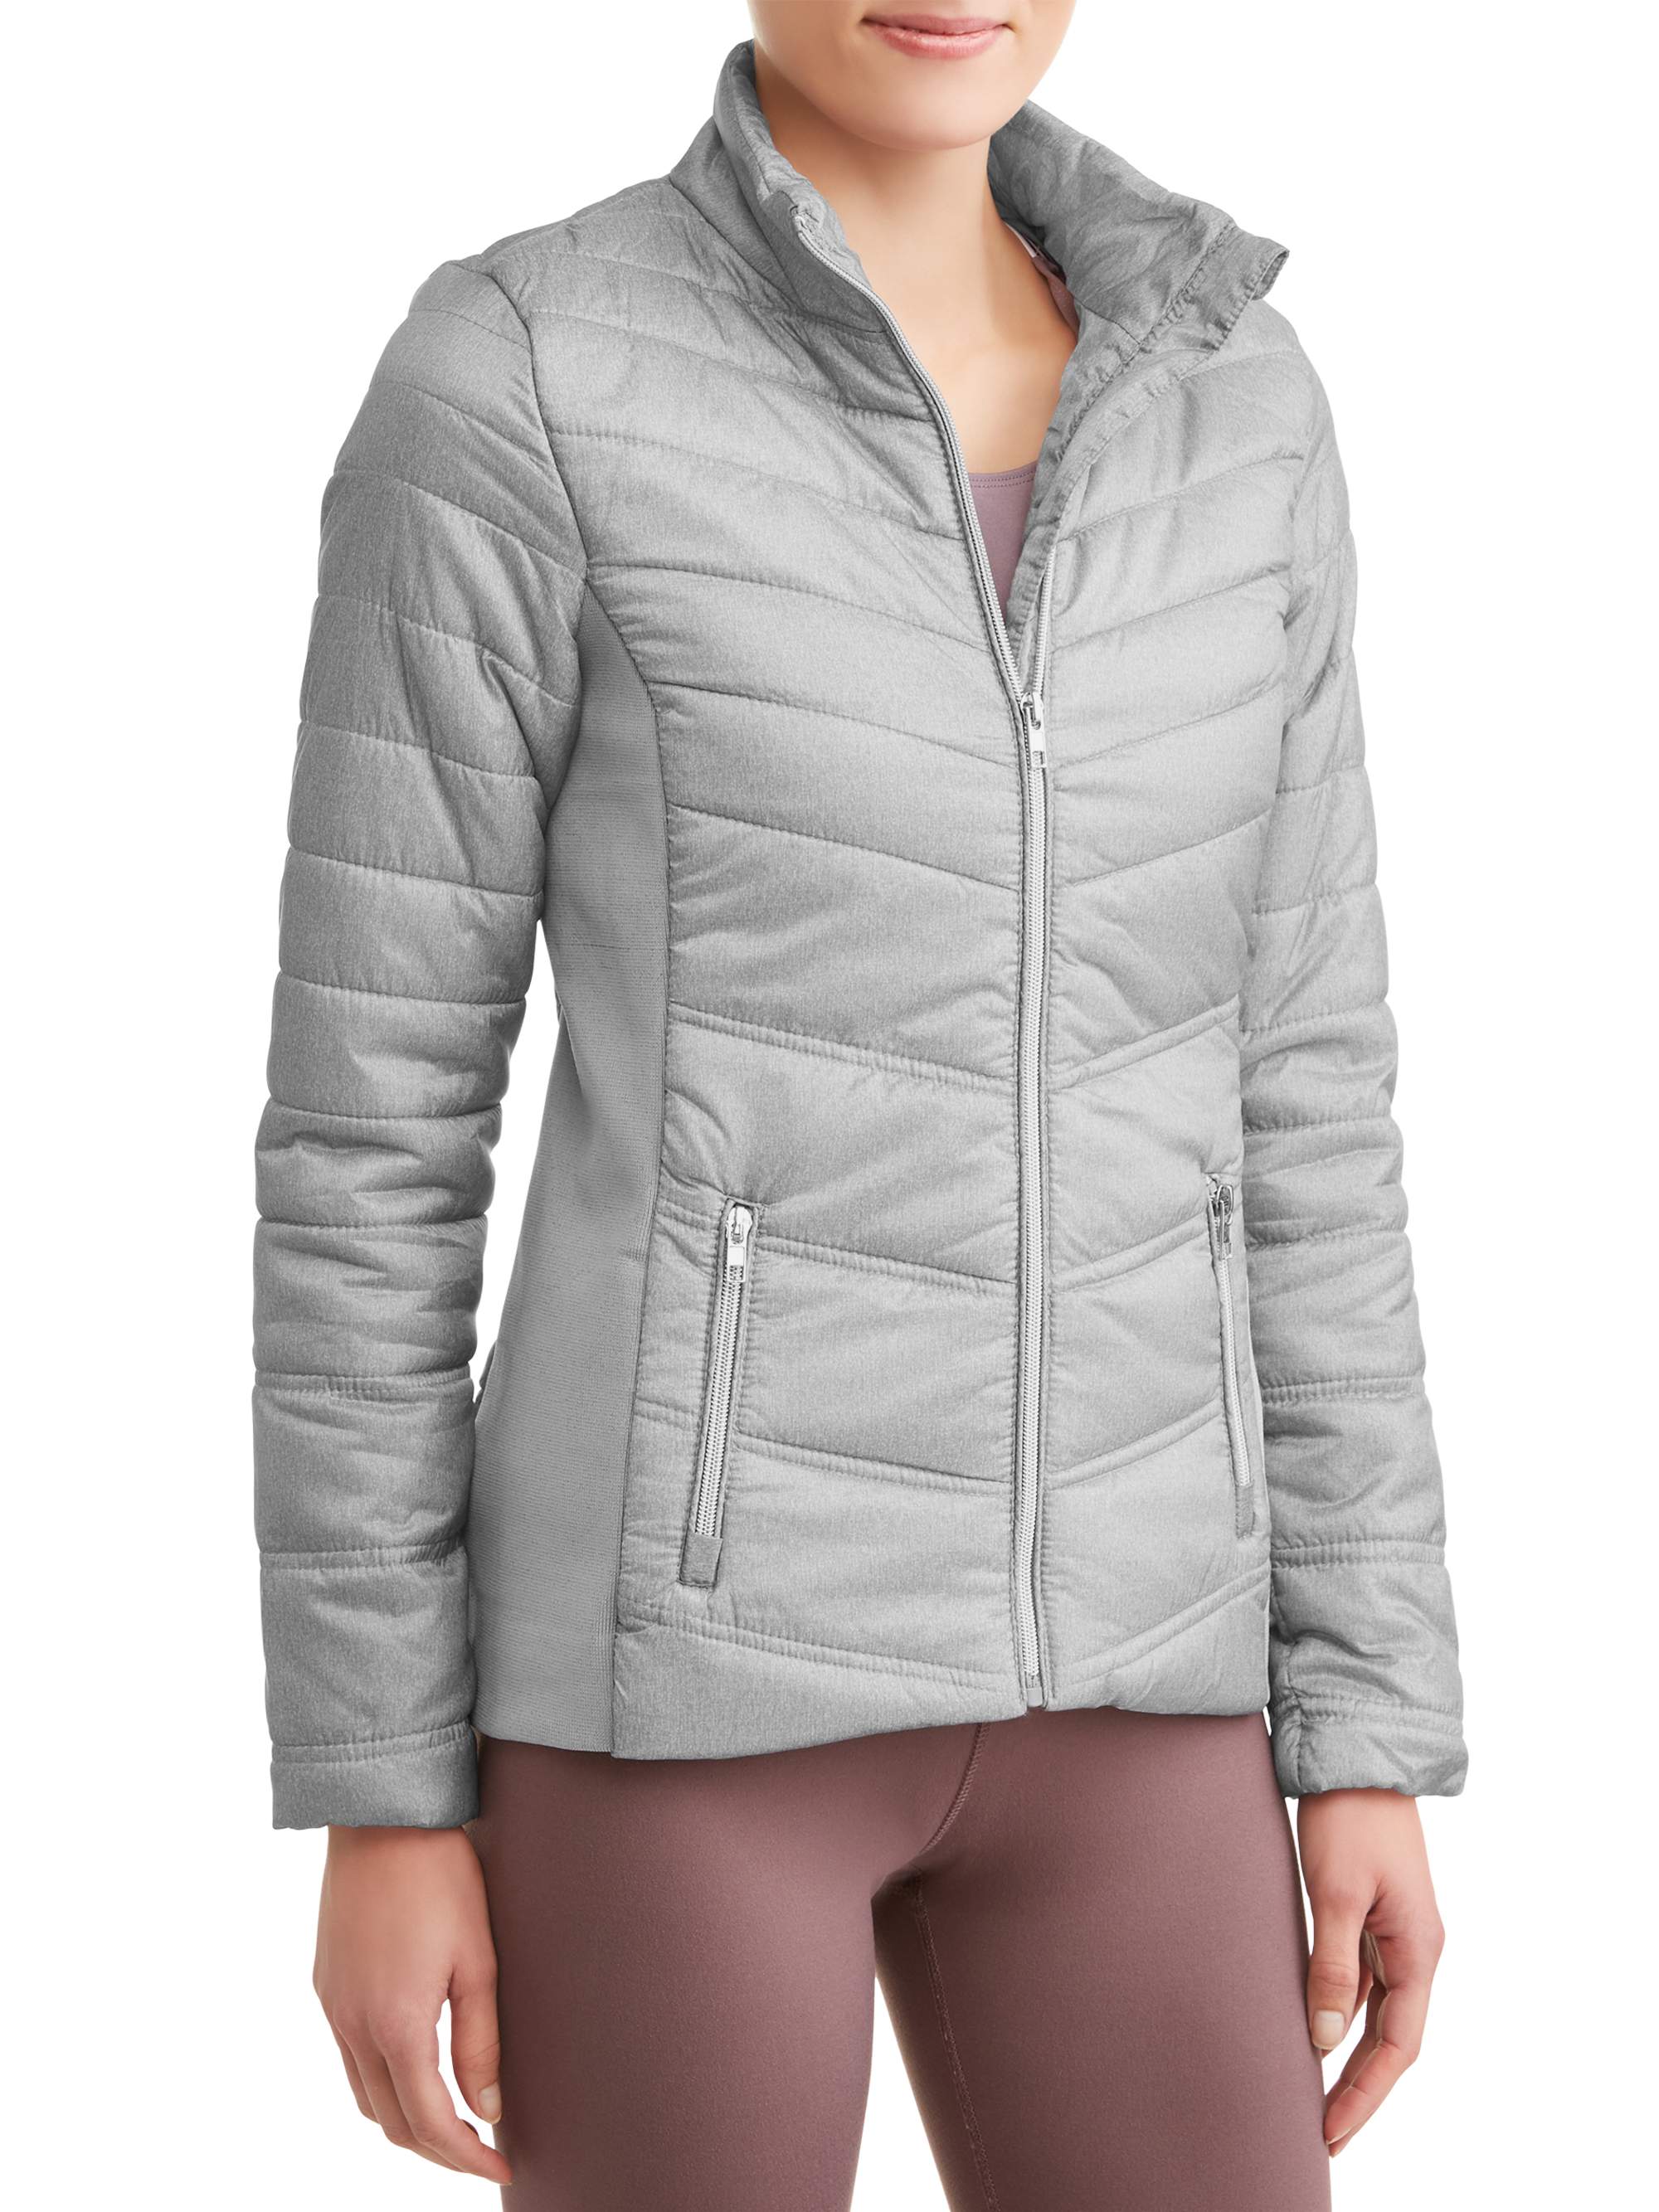 Women's Active Quilted Puffer Jacket - image 1 of 4